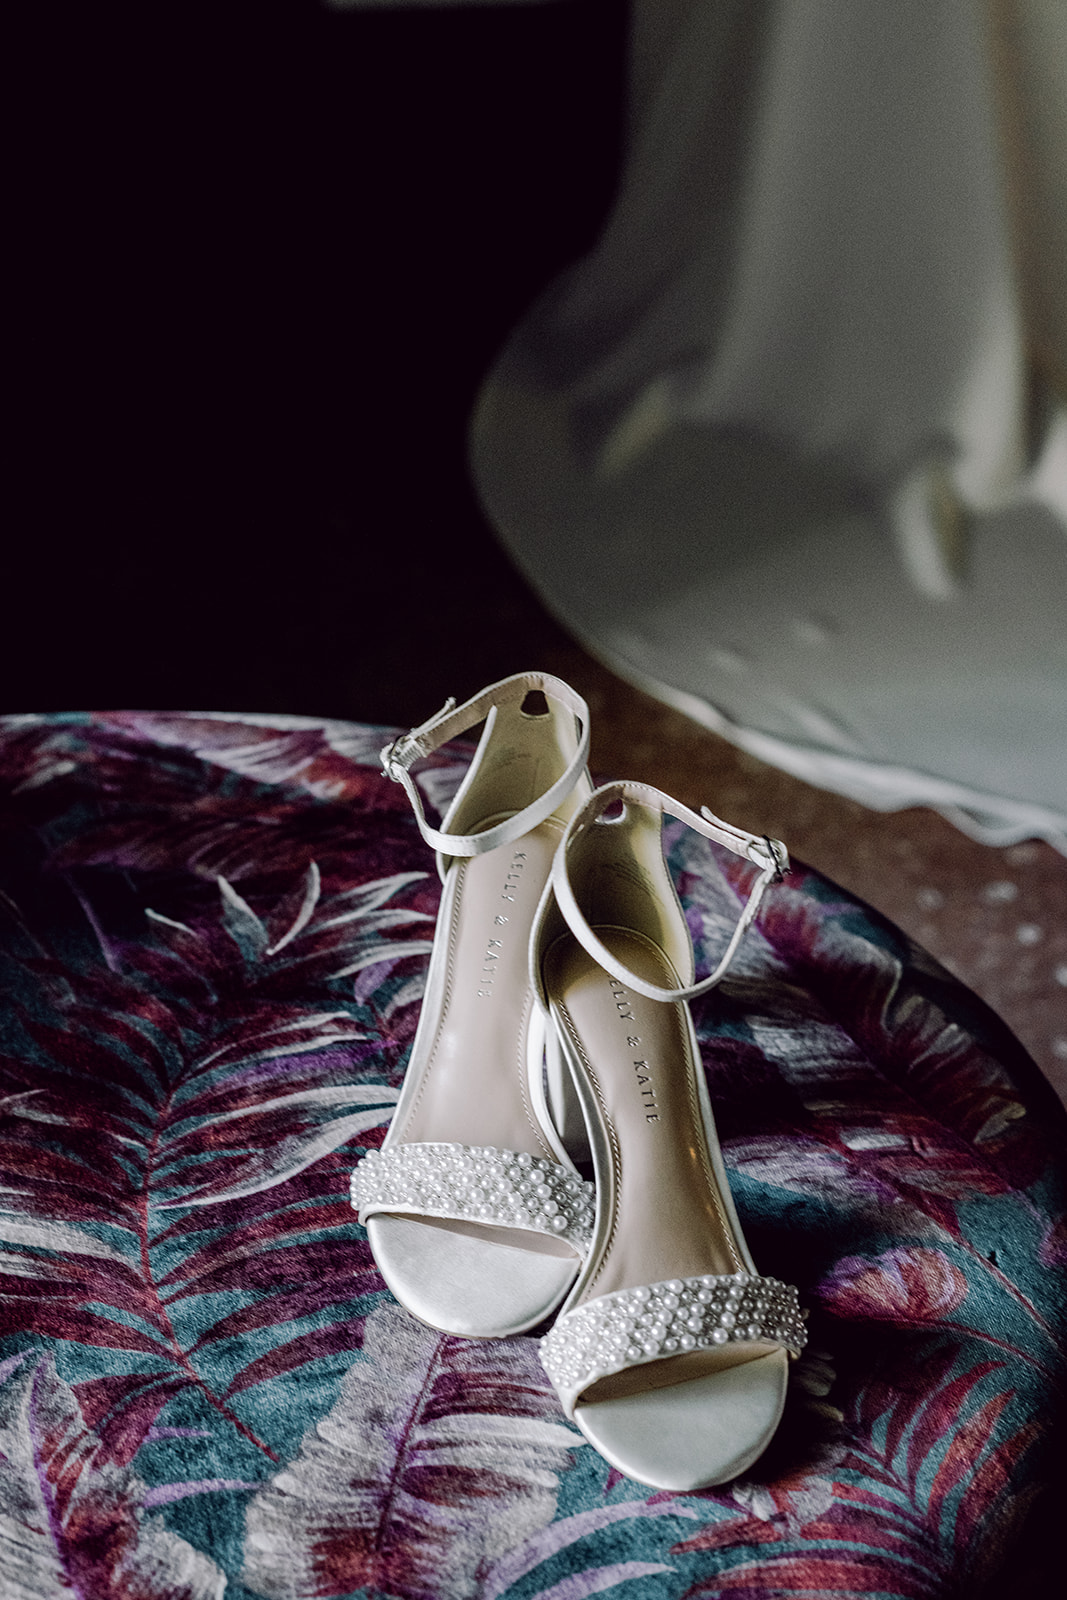 Kelly & Katie bridal heels on colorful ottoman at Mayfair House Hotel & Garden in Miami for wedding day details.